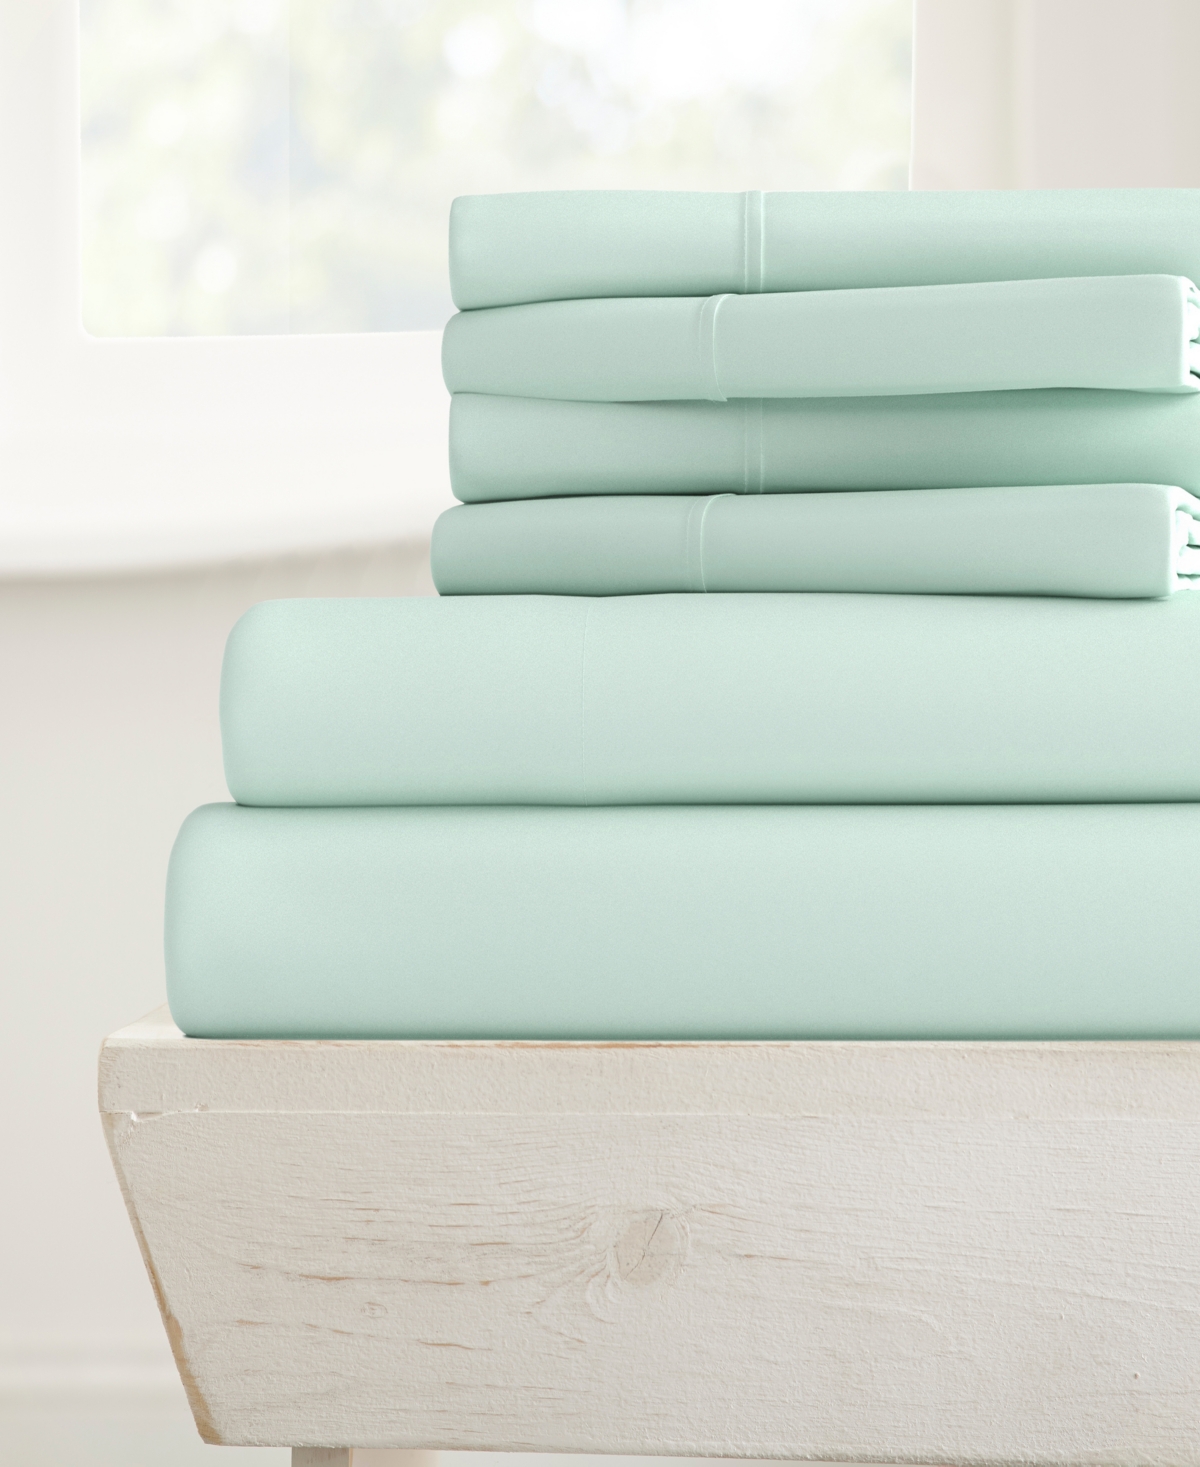 Ienjoy Home Solids In Style By The Home Collection 6 Piece Bed Sheet Set, Queen In Mint